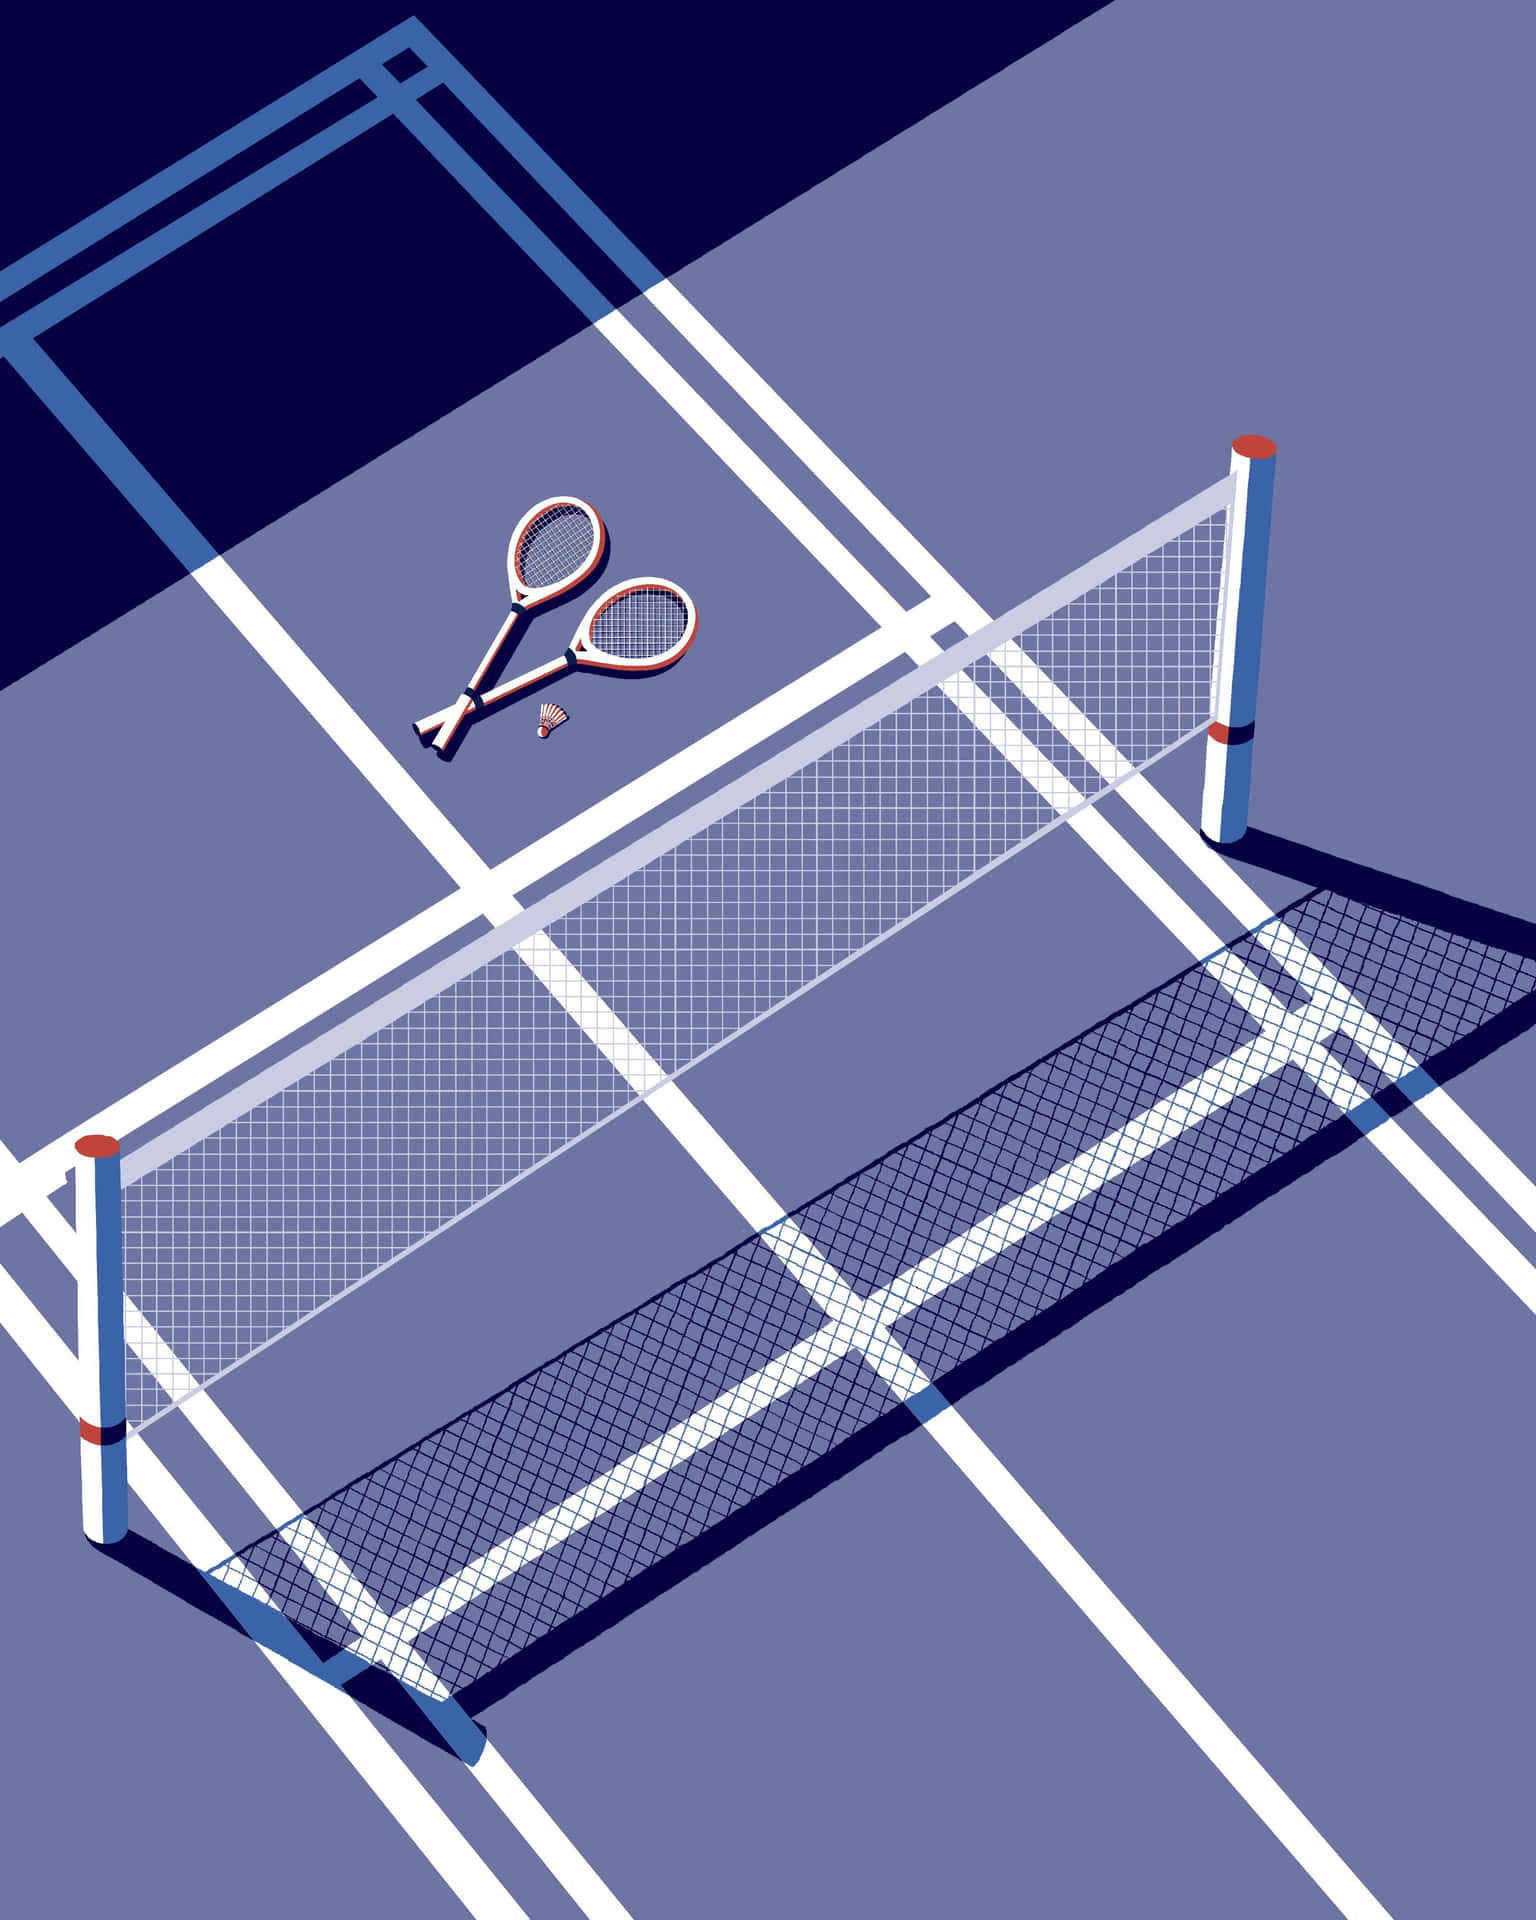 A Tennis Net With A Pair Of Scissors